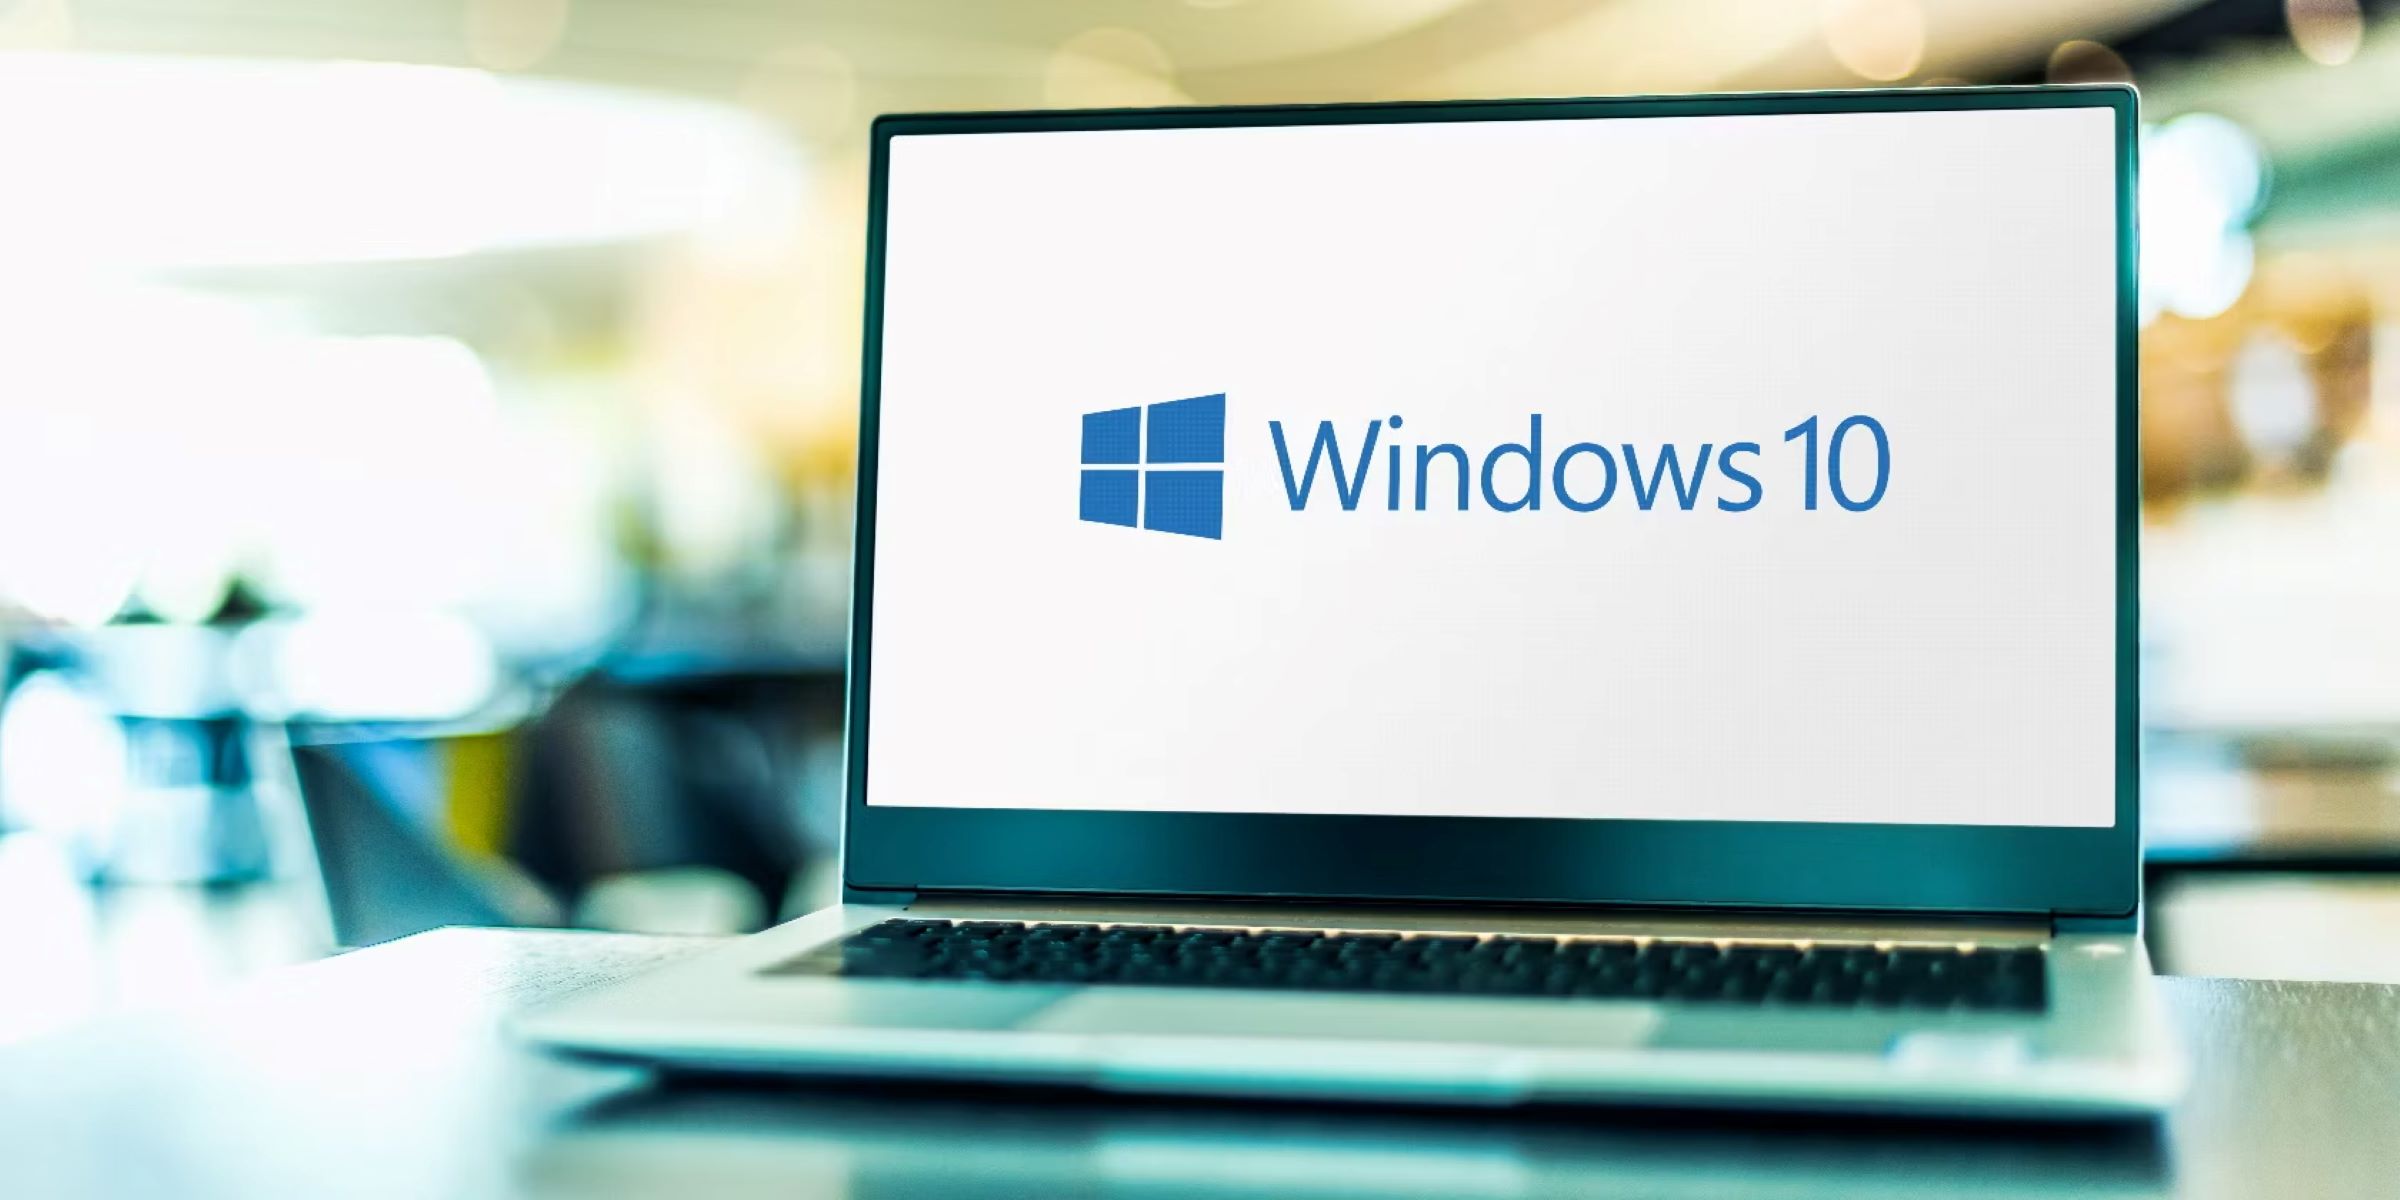 How To Get Windows 10 For Free